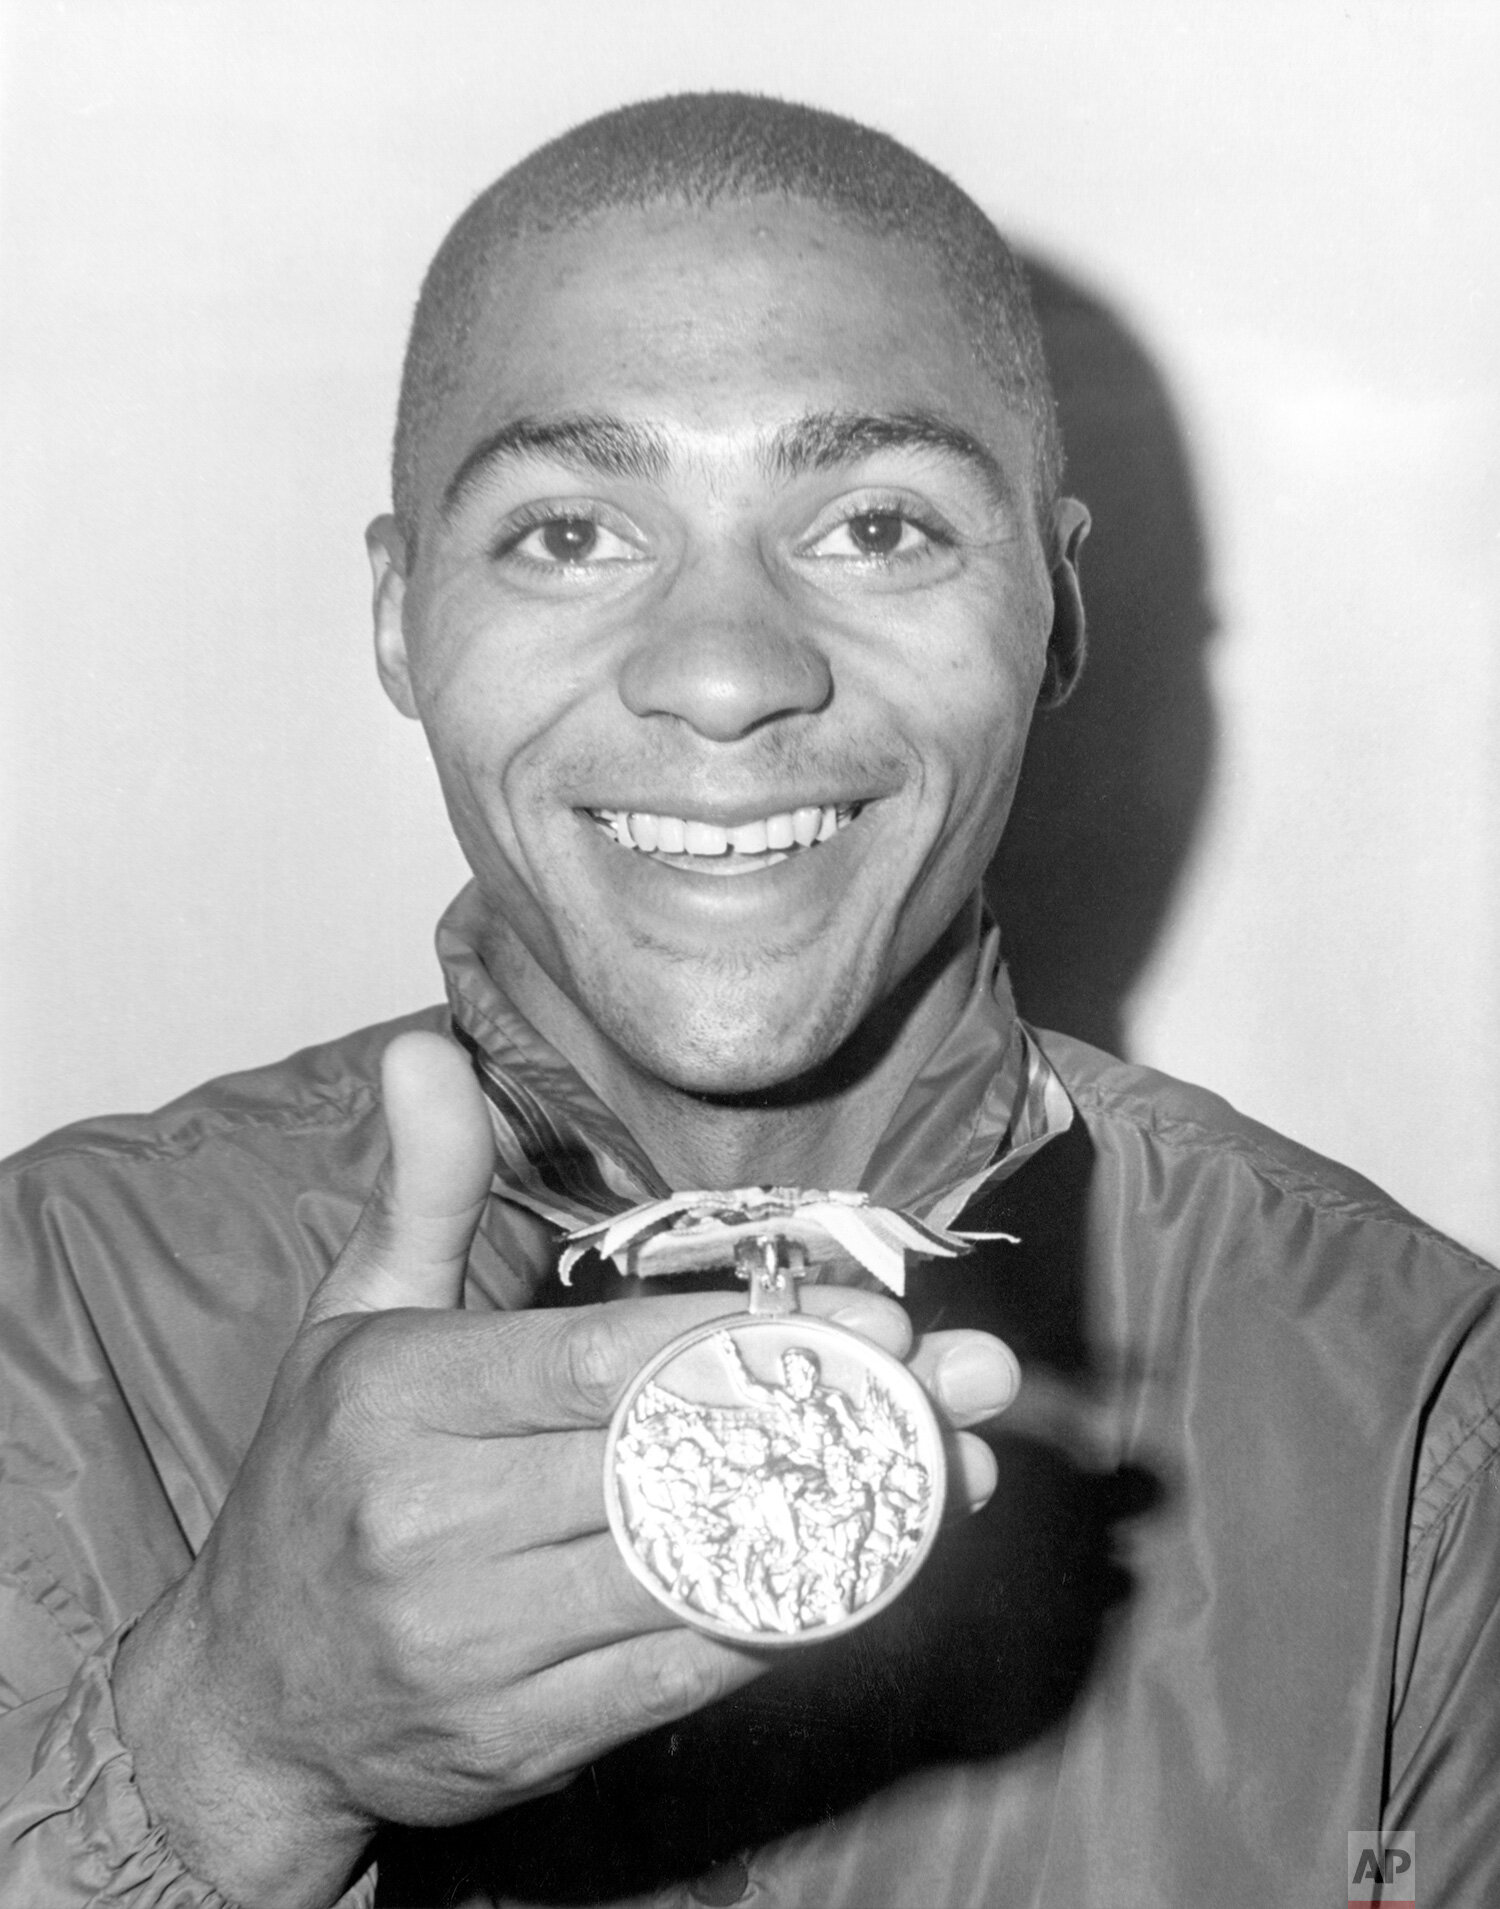  U.S. sprinter Henry Carr displays the gold medal he won in the 200 meter race at the 1964 Olympics in Tokyo, Oct. 17, 1964. (AP Photo) 